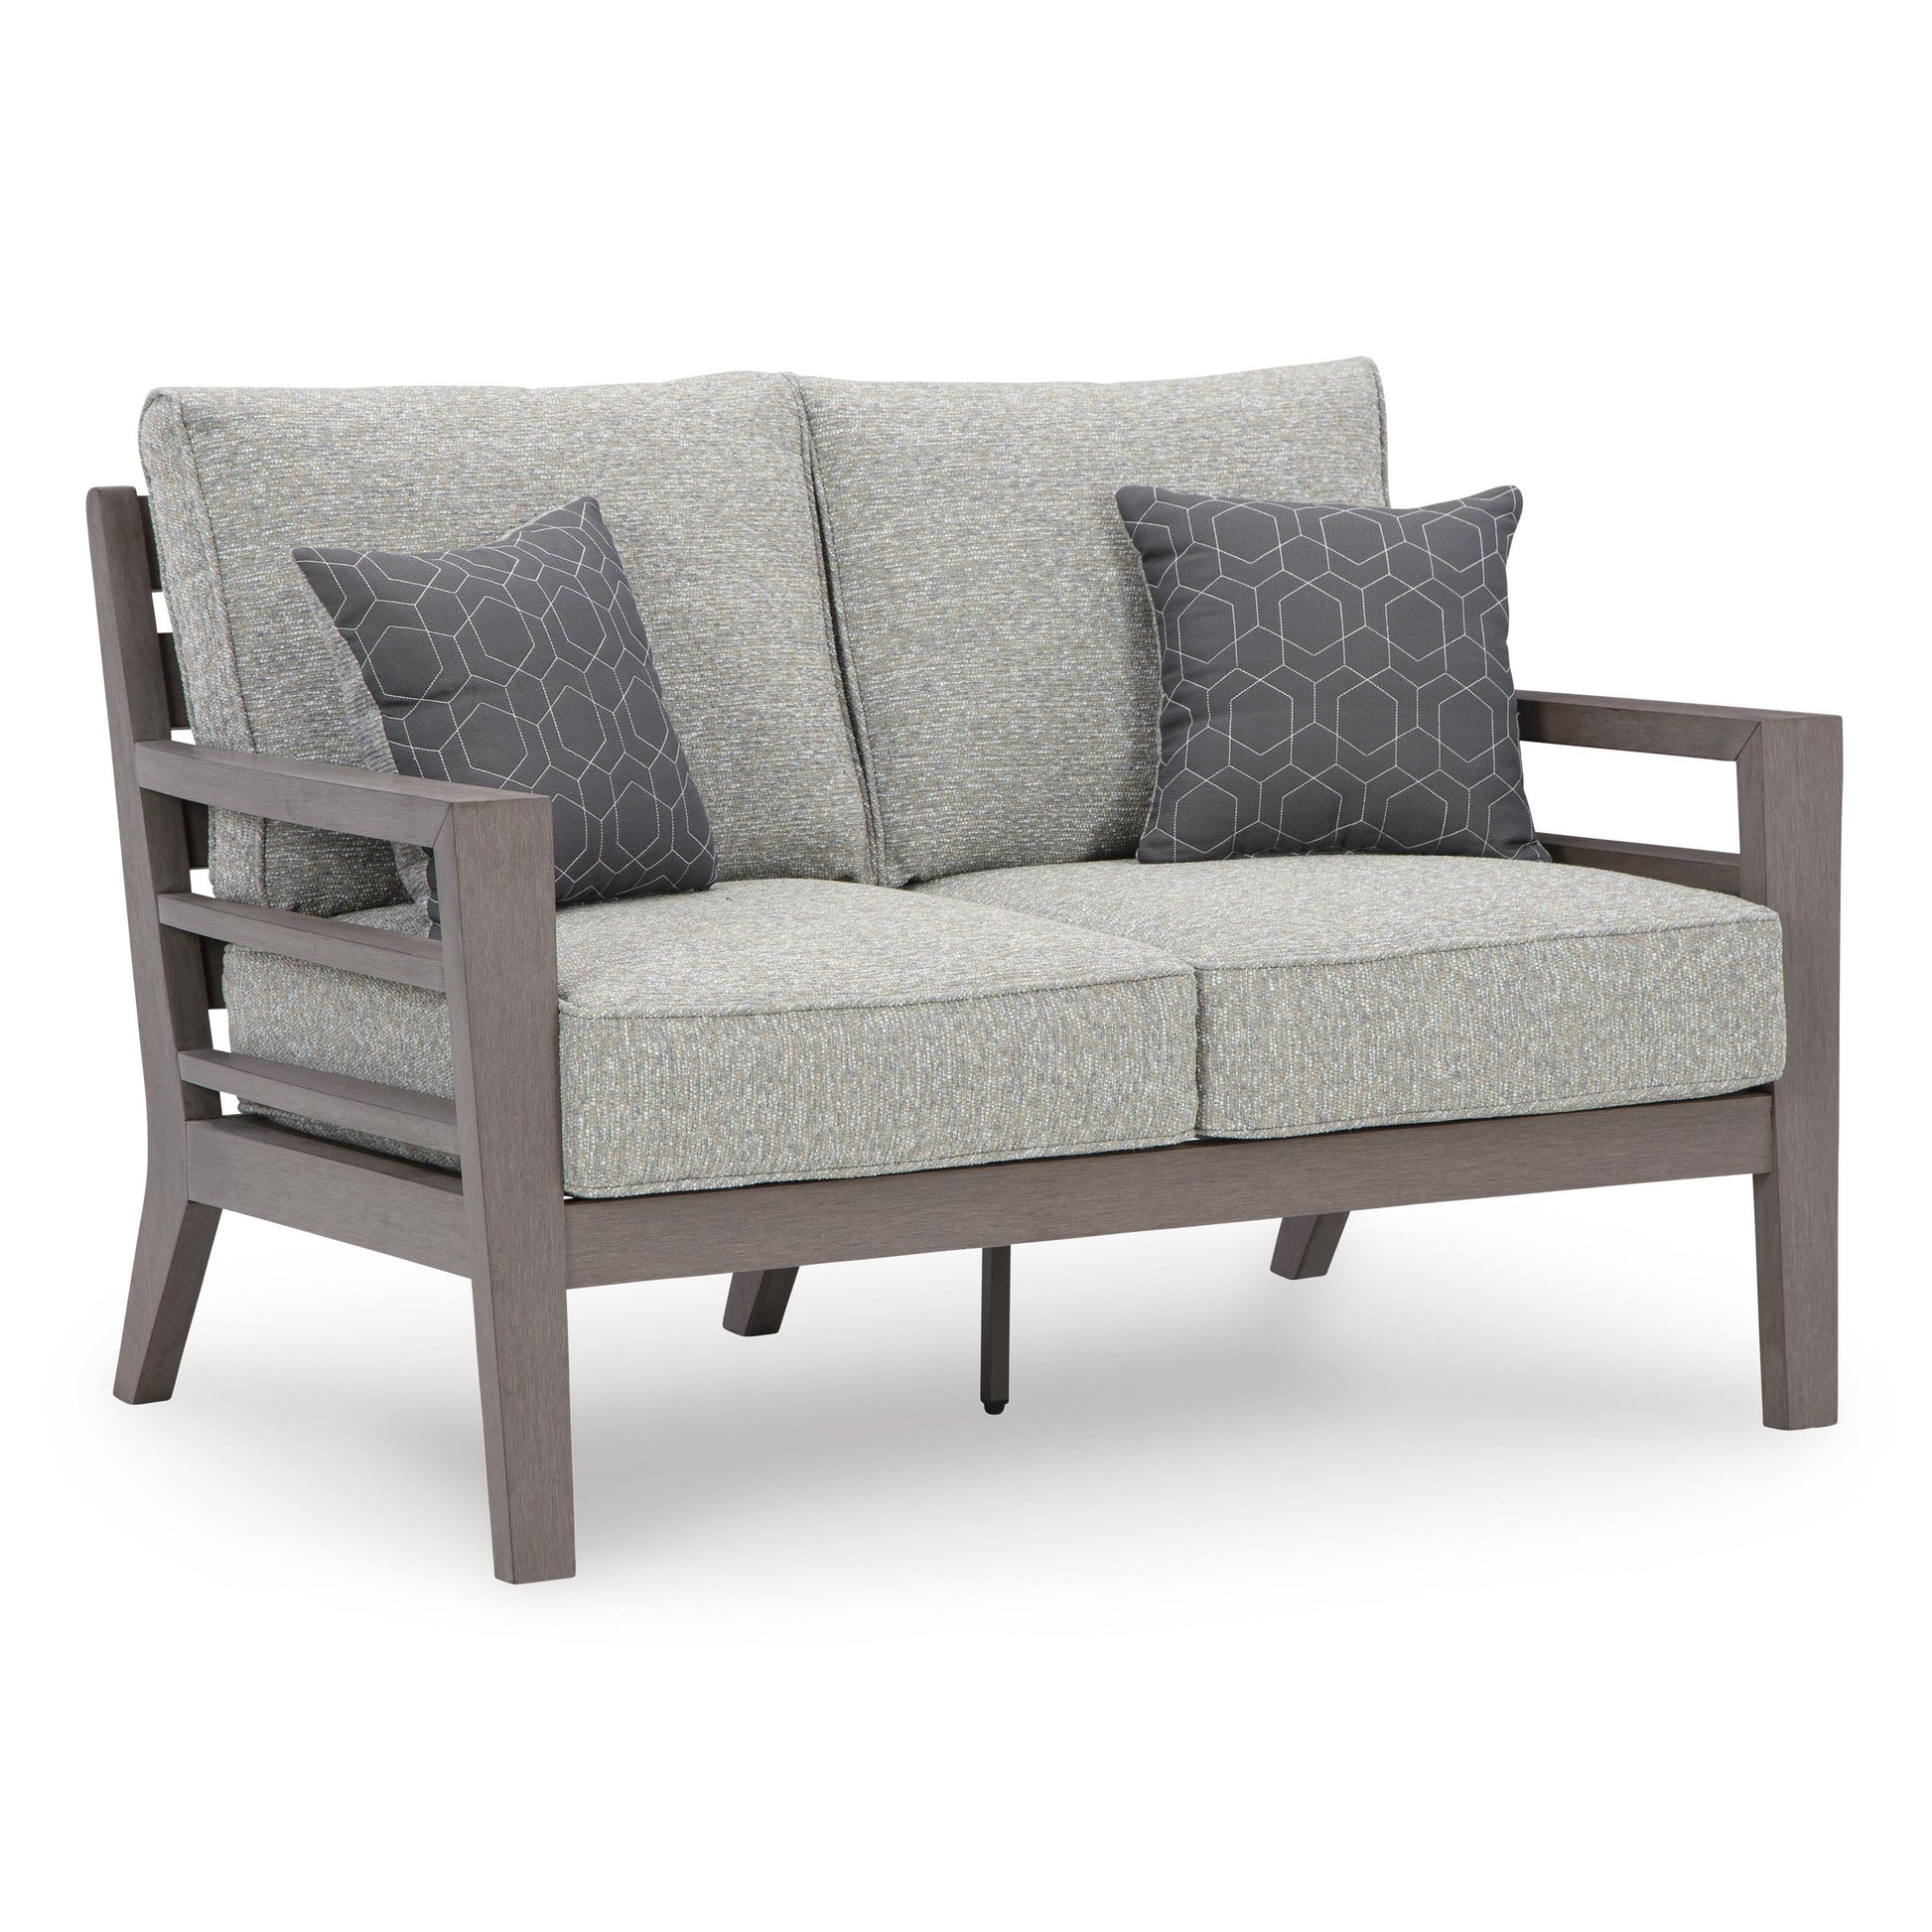 Signature Design by Ashley Outdoor Seating Loveseats P564-835 IMAGE 1